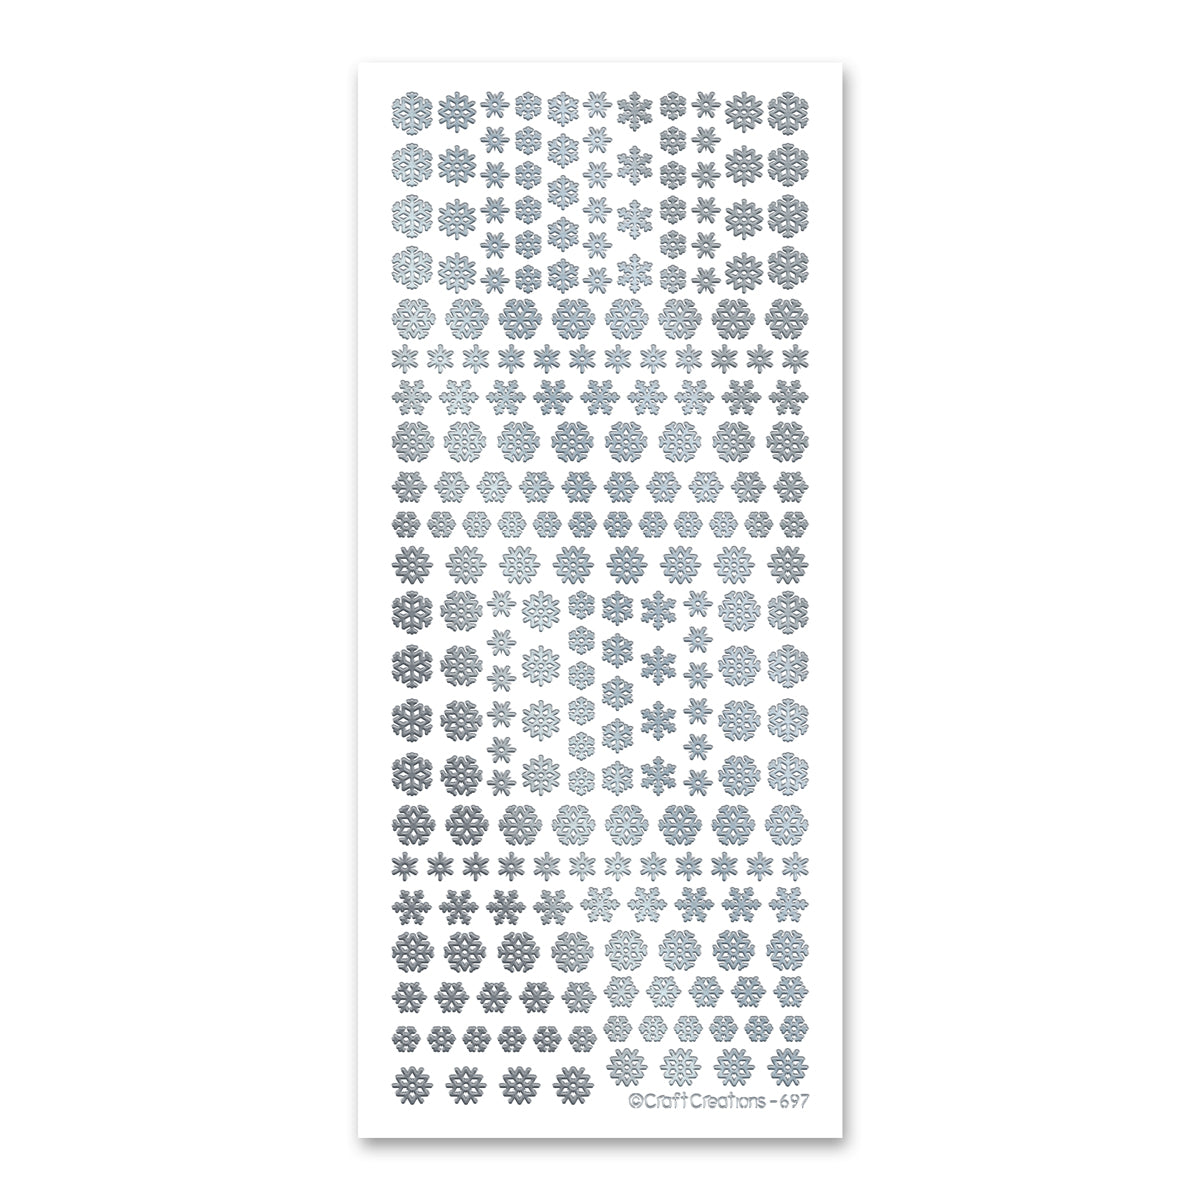 Snowflakes Small Silver Self Adhesive Stickers